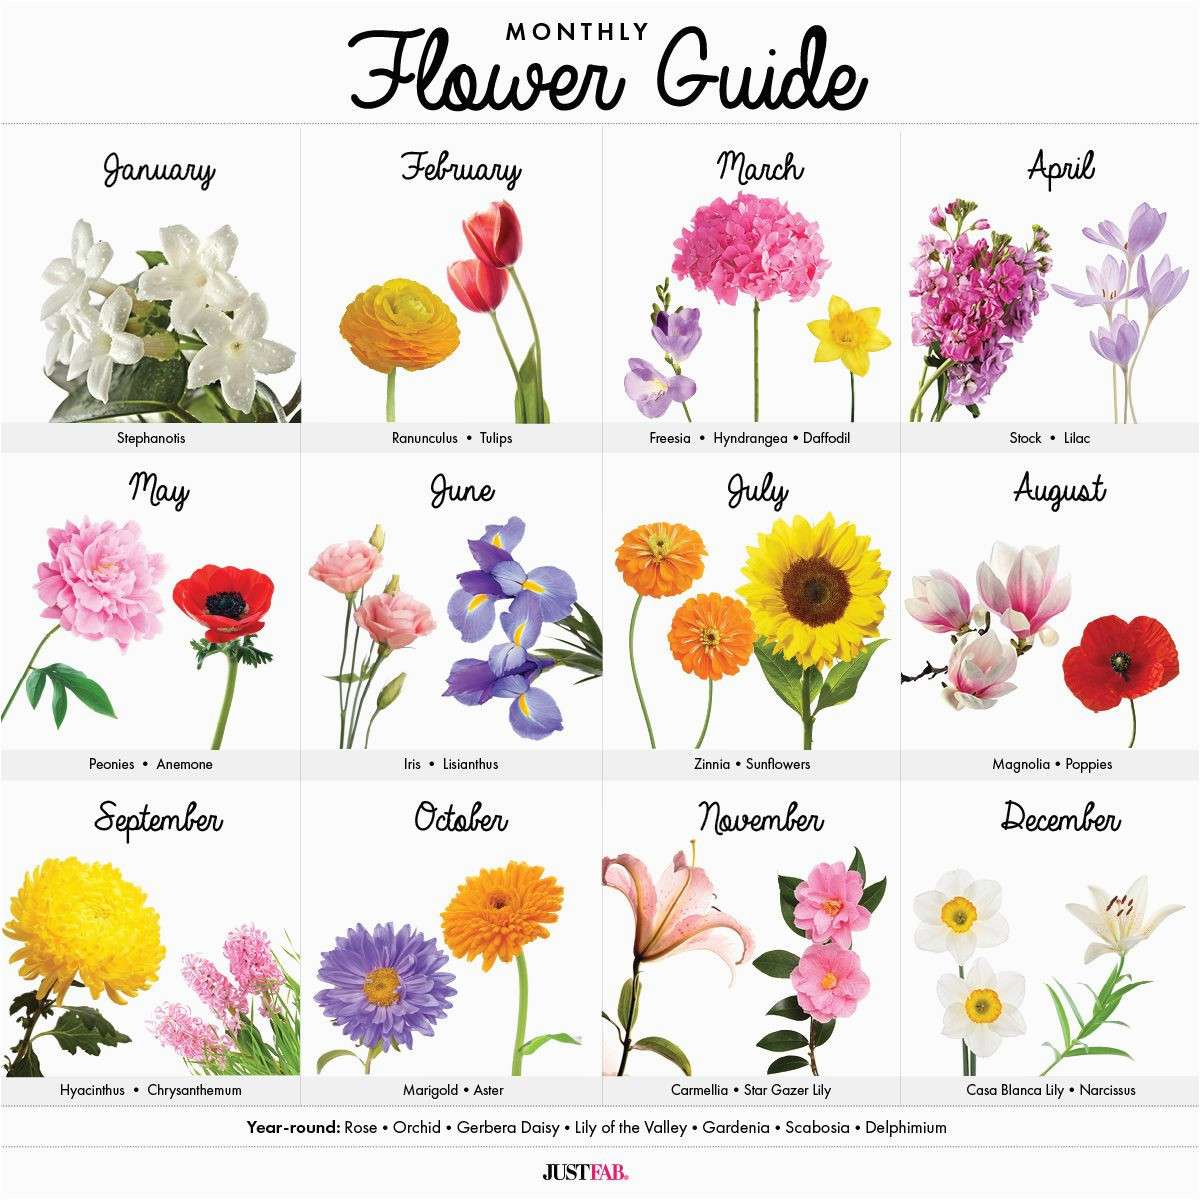 a visual guide to wedding flowers by month wedding